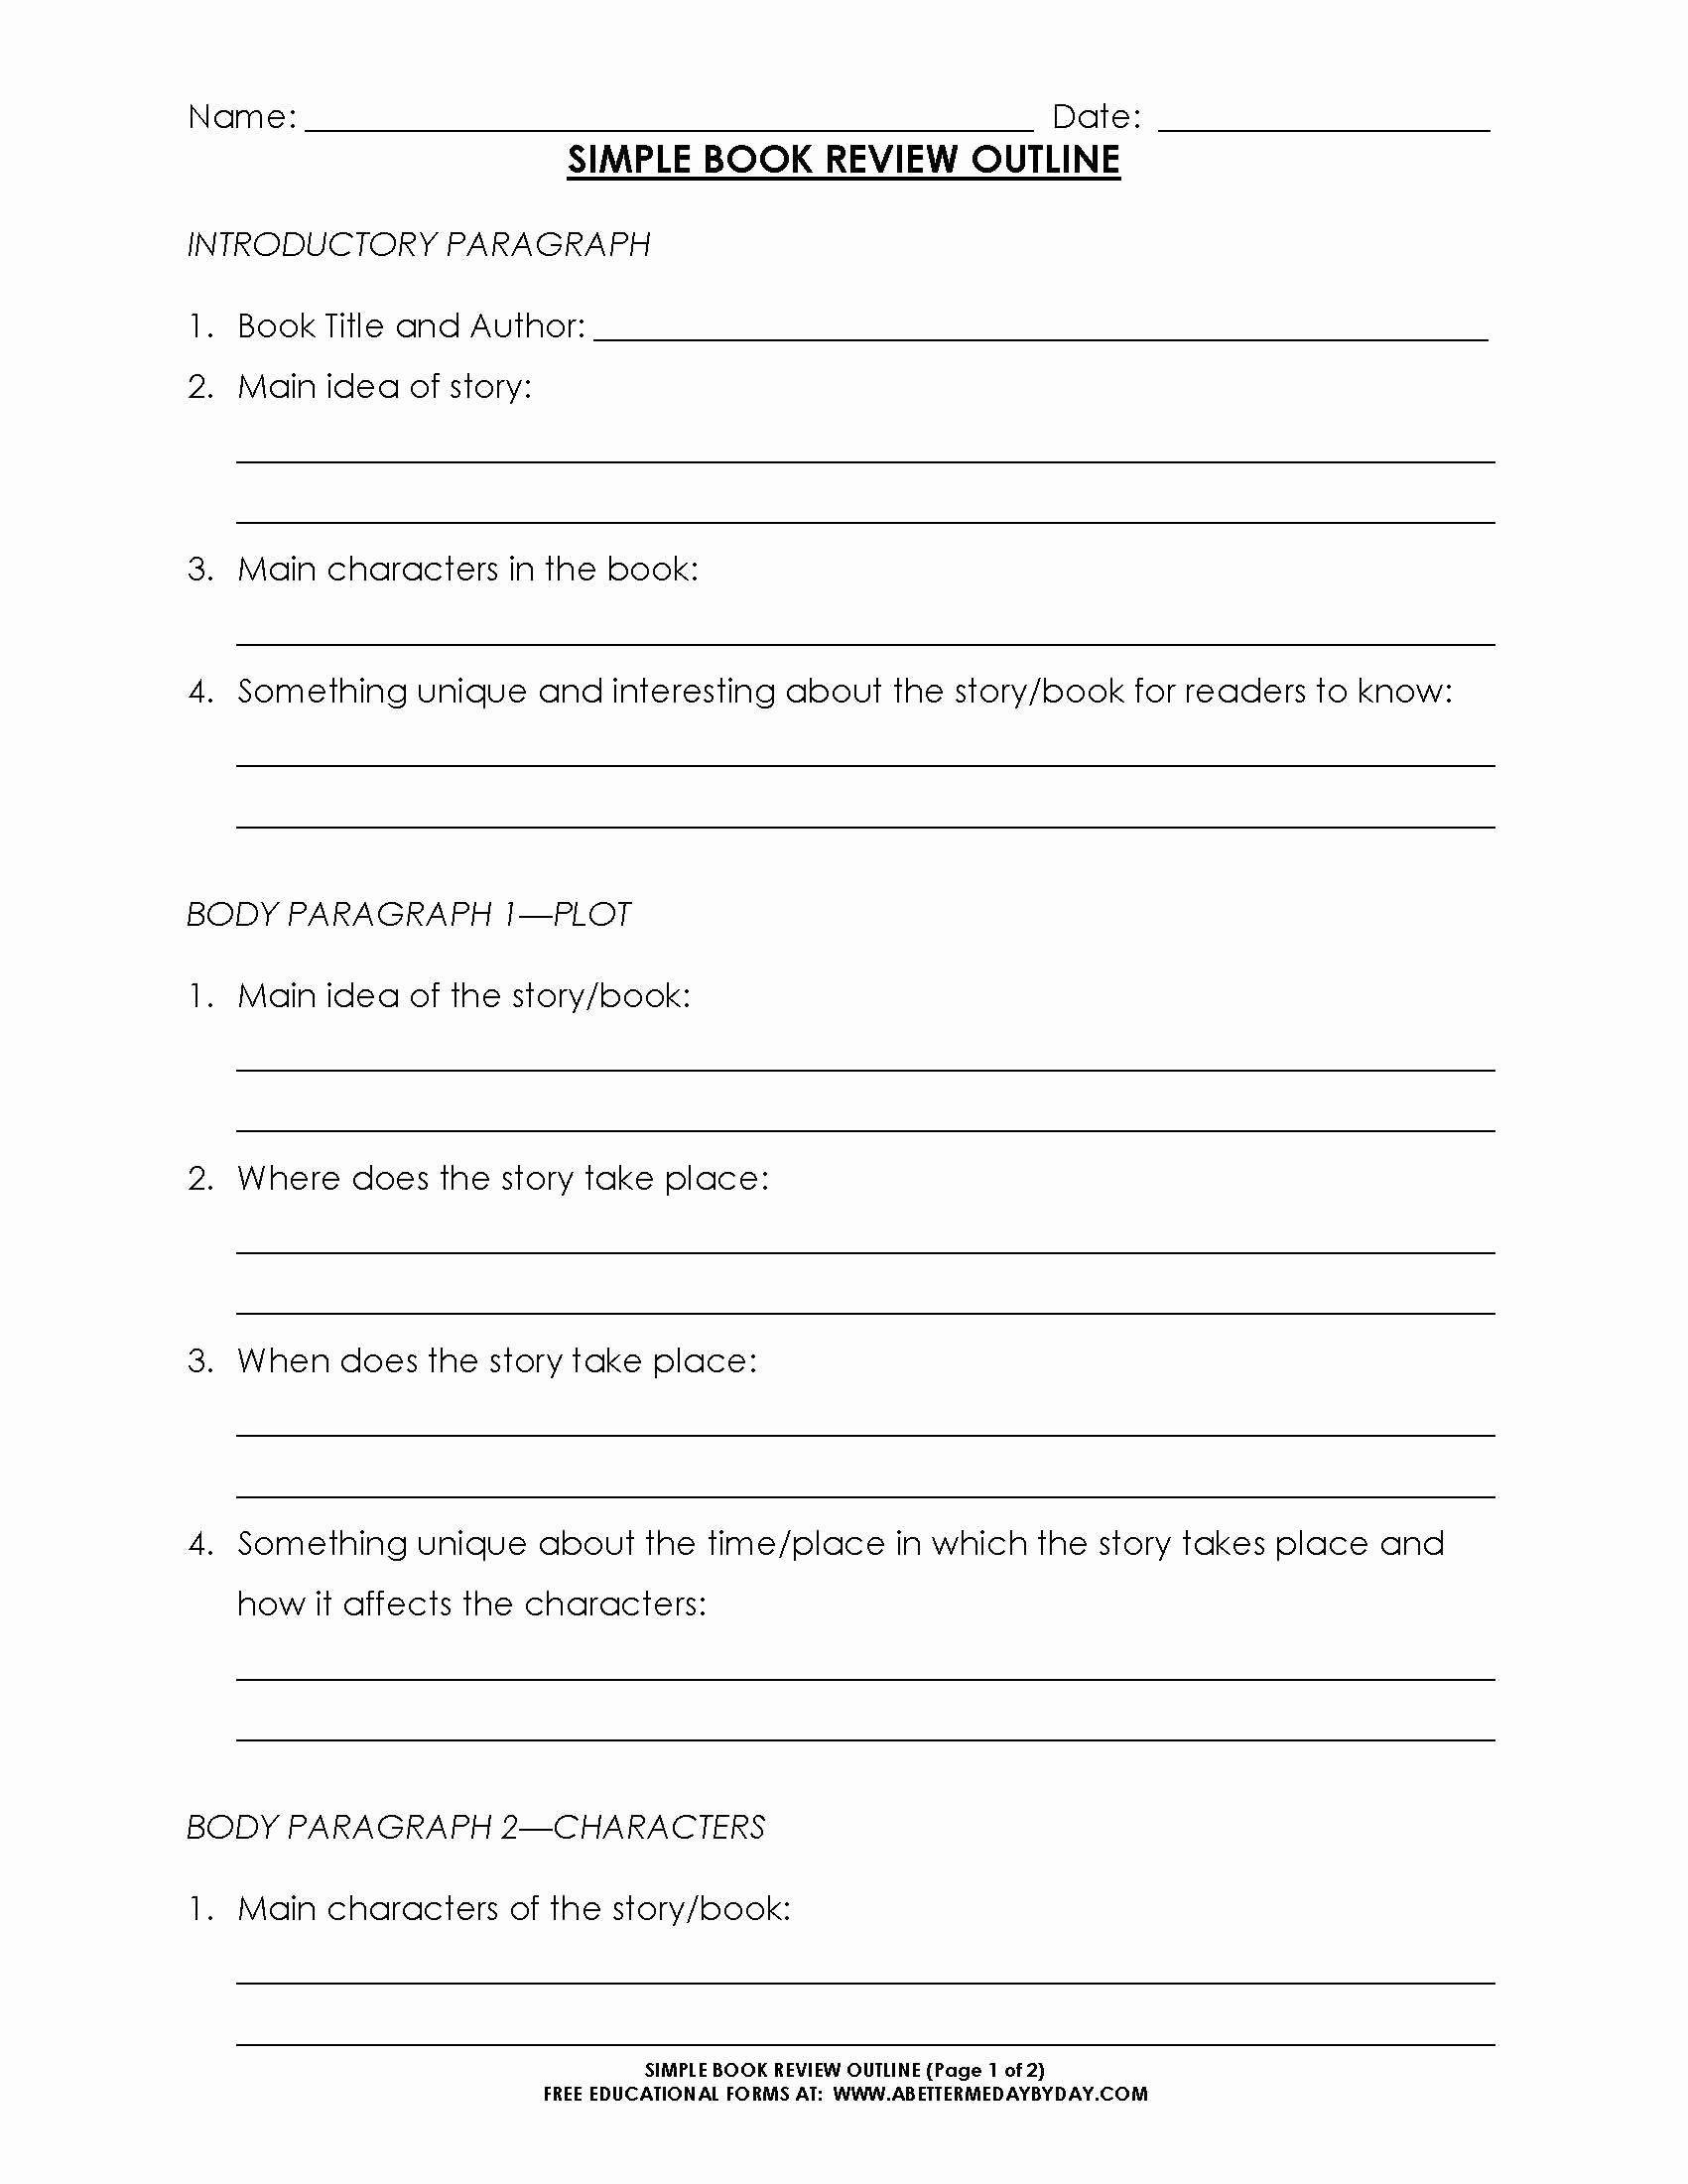 Book Report Outline Template New Free Simple 5 Paragraph Book Review or Report Outline